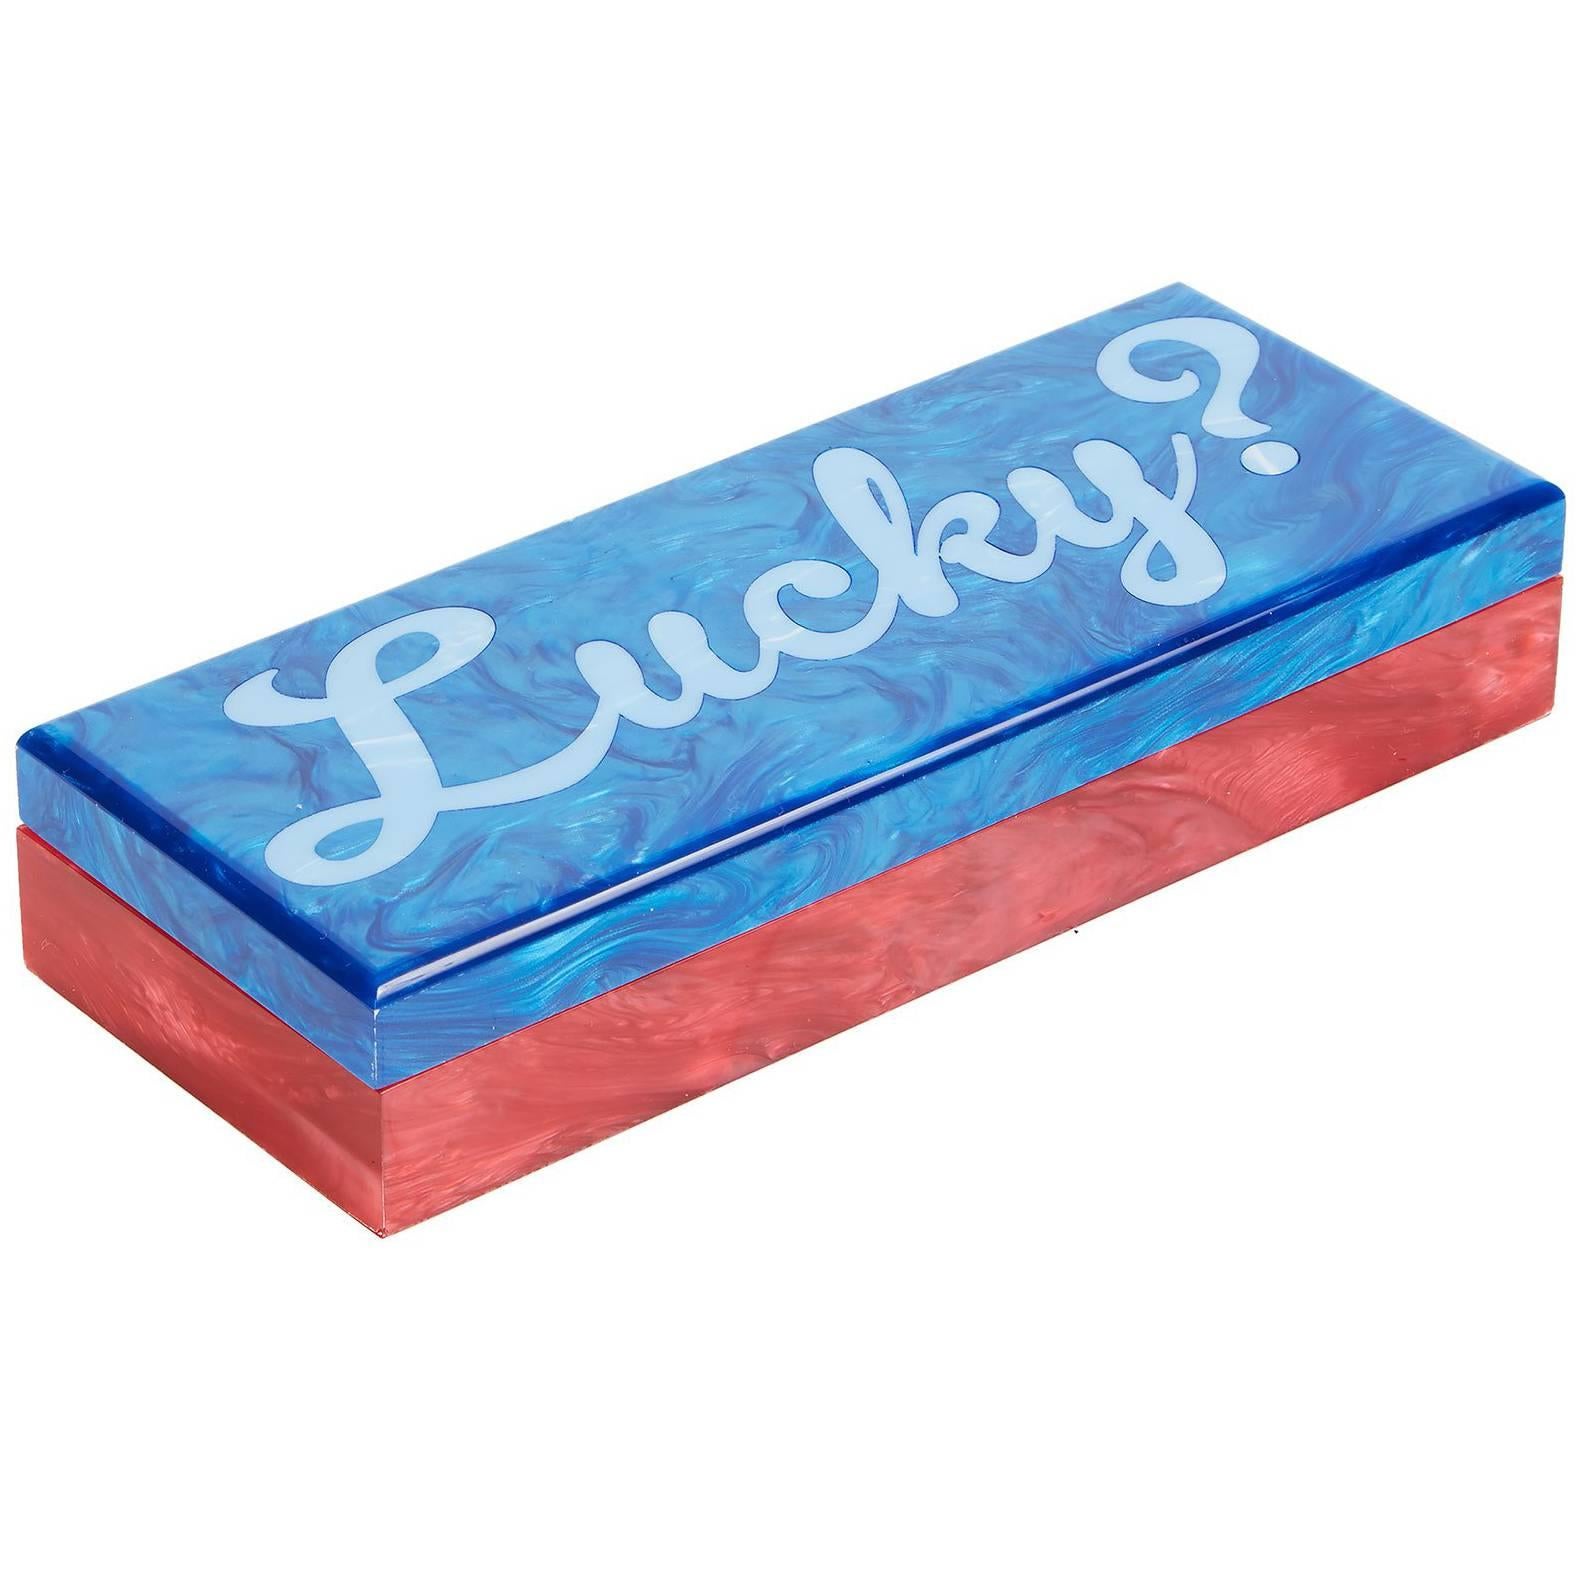 Edie Parker Home Card Box Lucky in Ocean Blue and Red Pearlescent For Sale